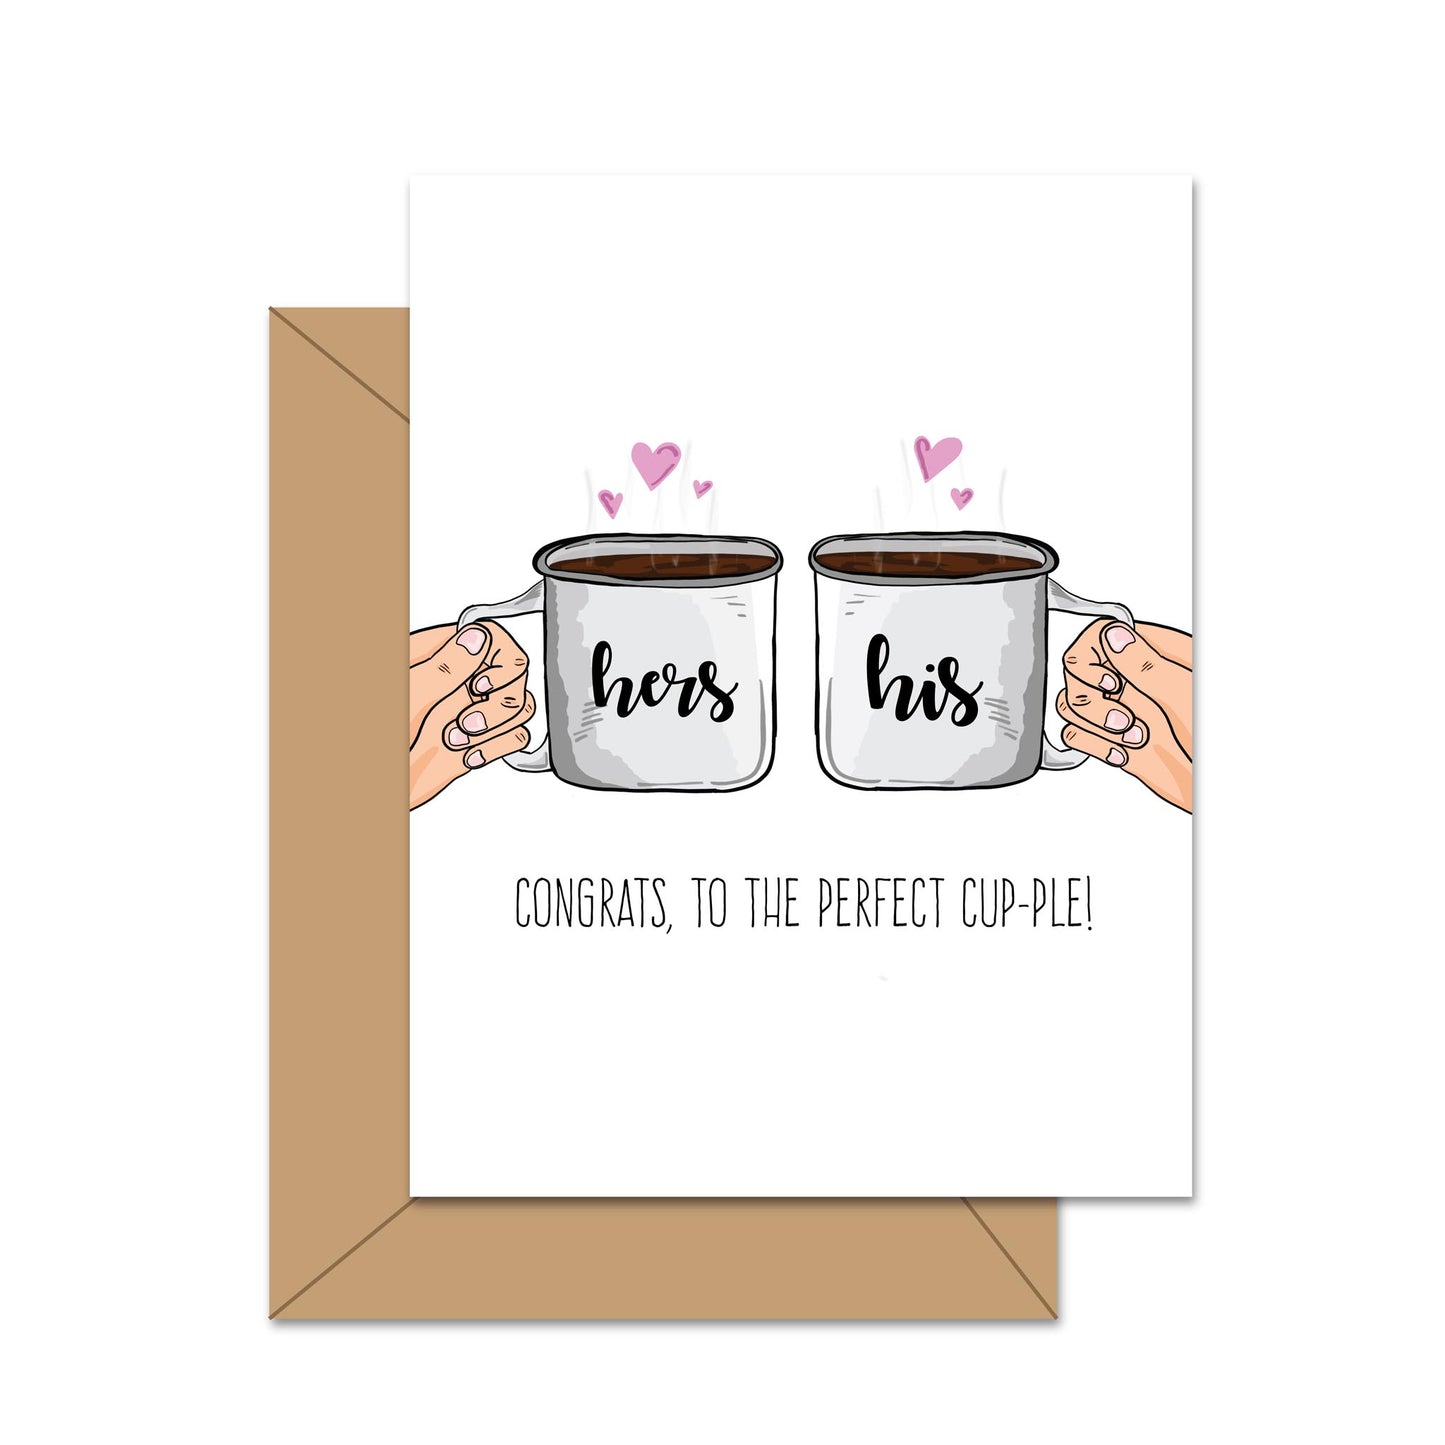 Congrats, To The Perfect Cup-ple! - Greeting Card